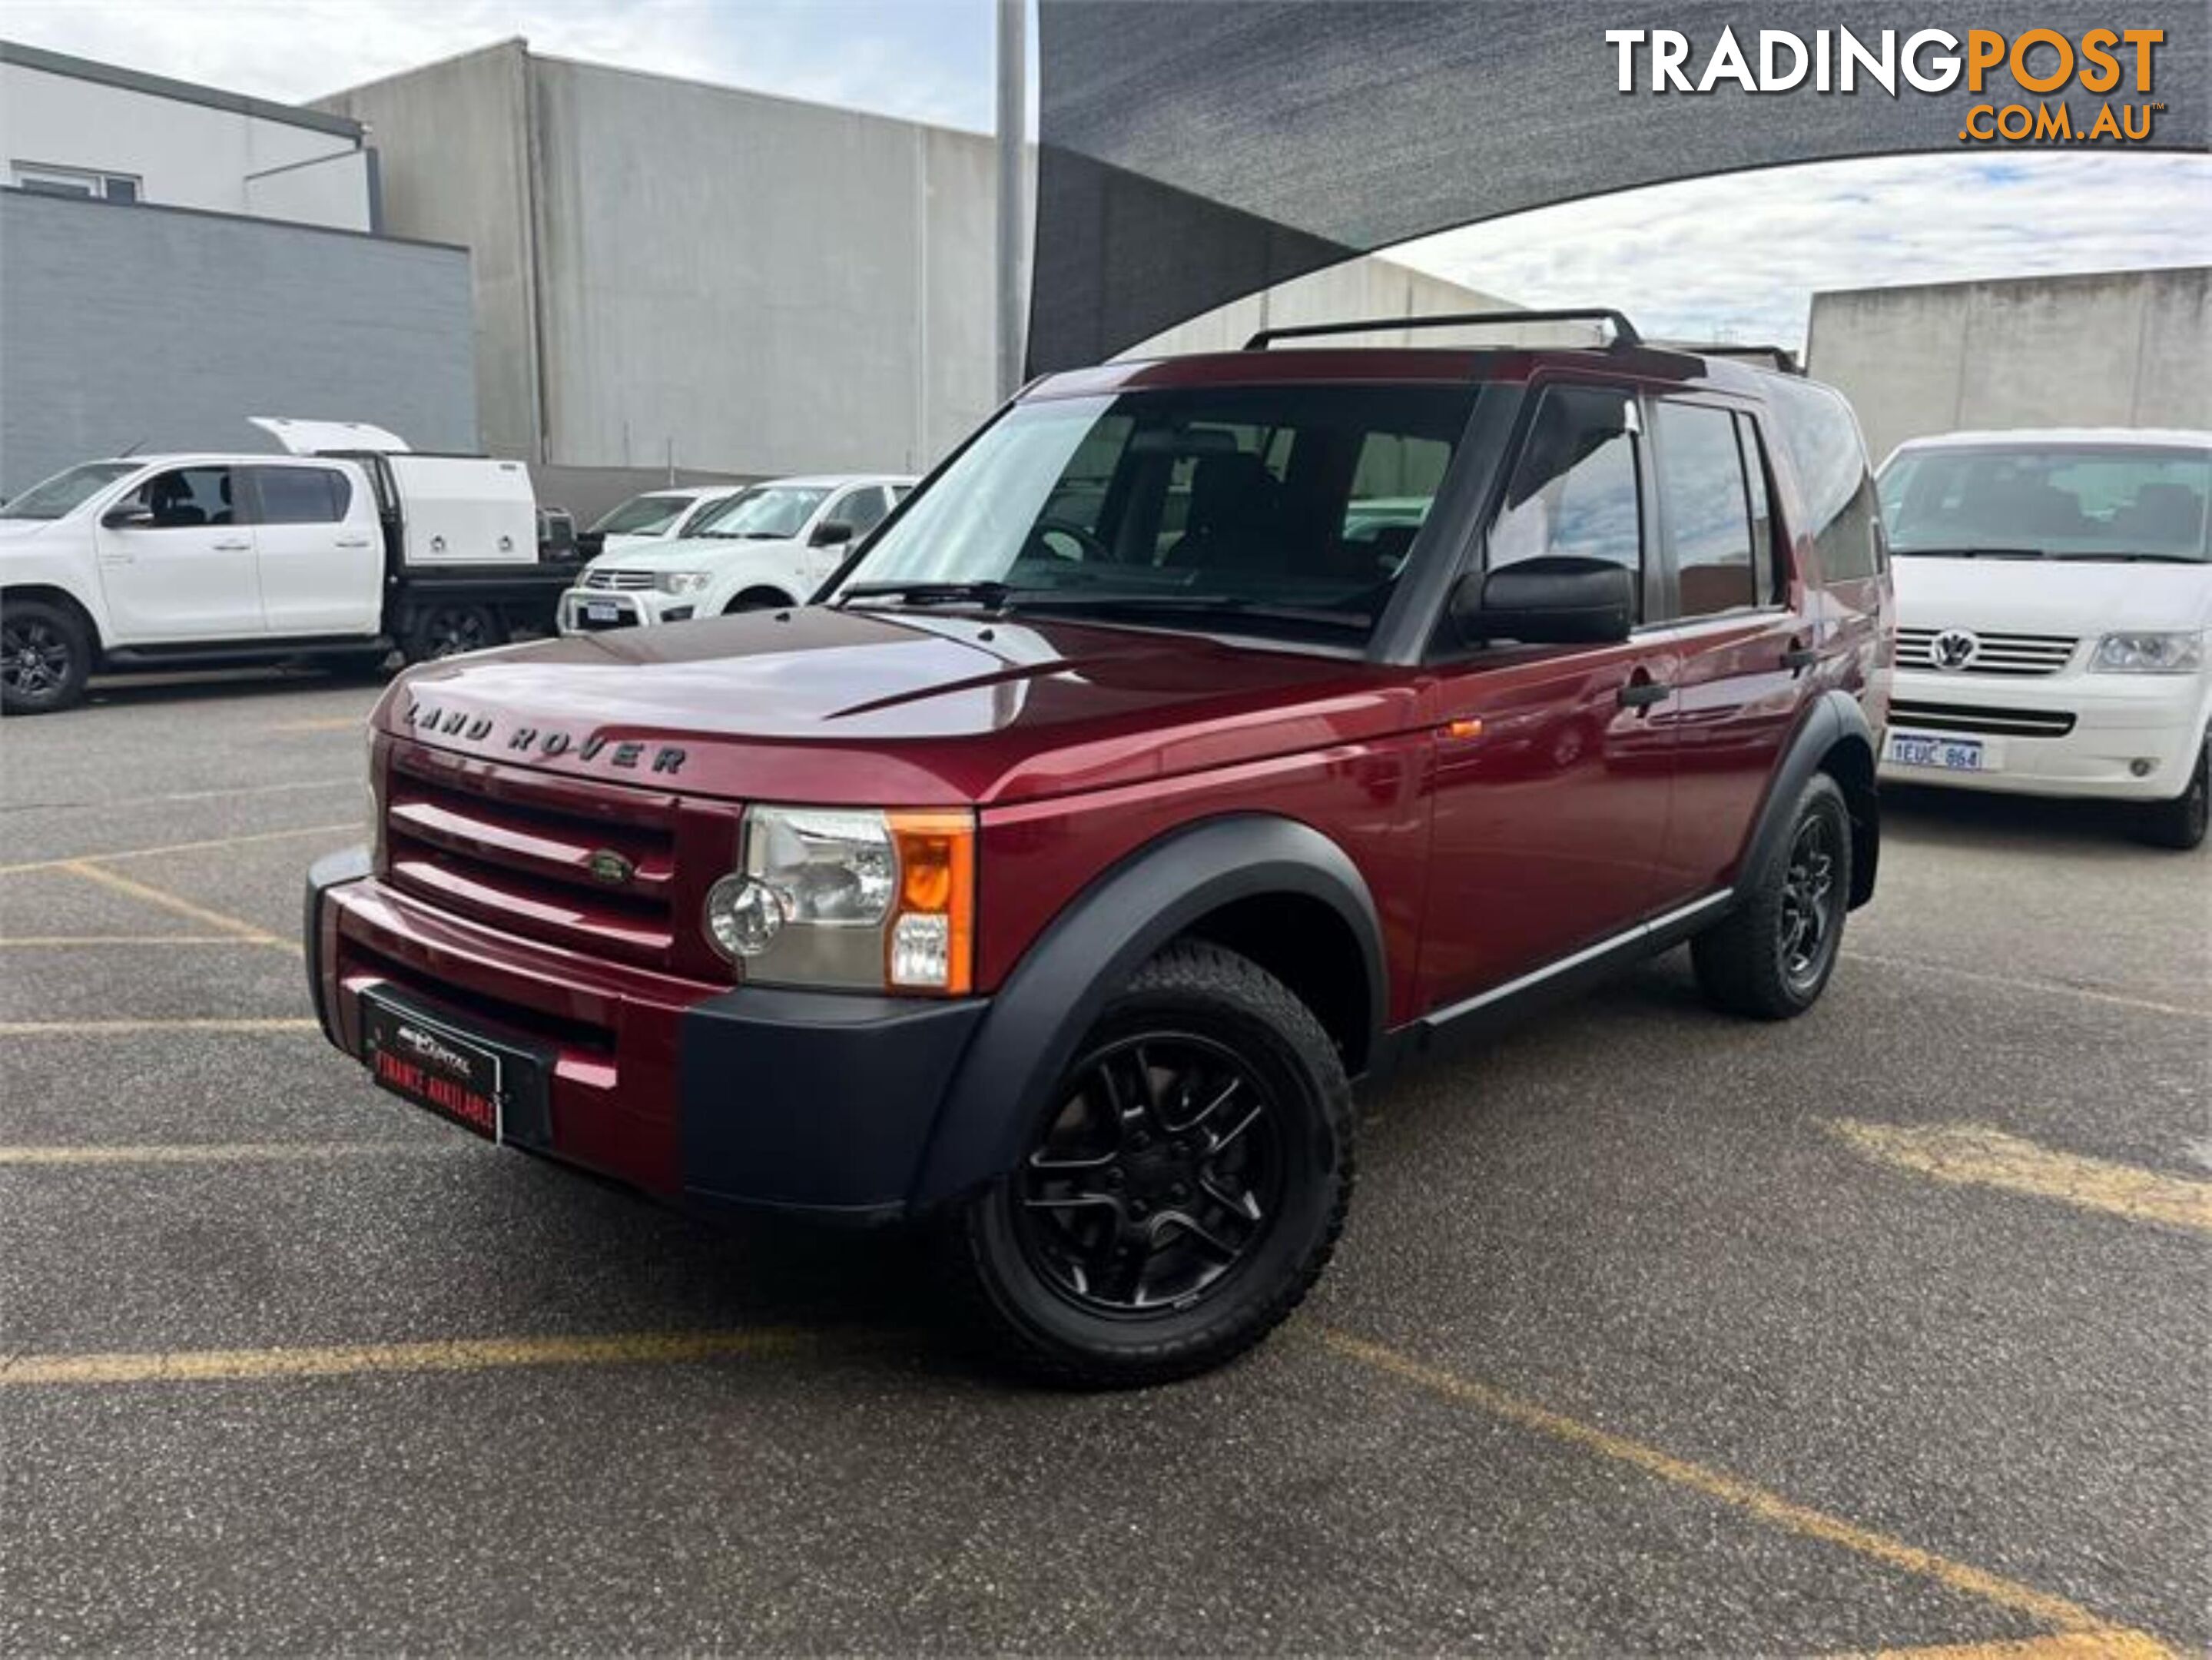 2005 LANDROVER DISCOVERY3 S  4D WAGON